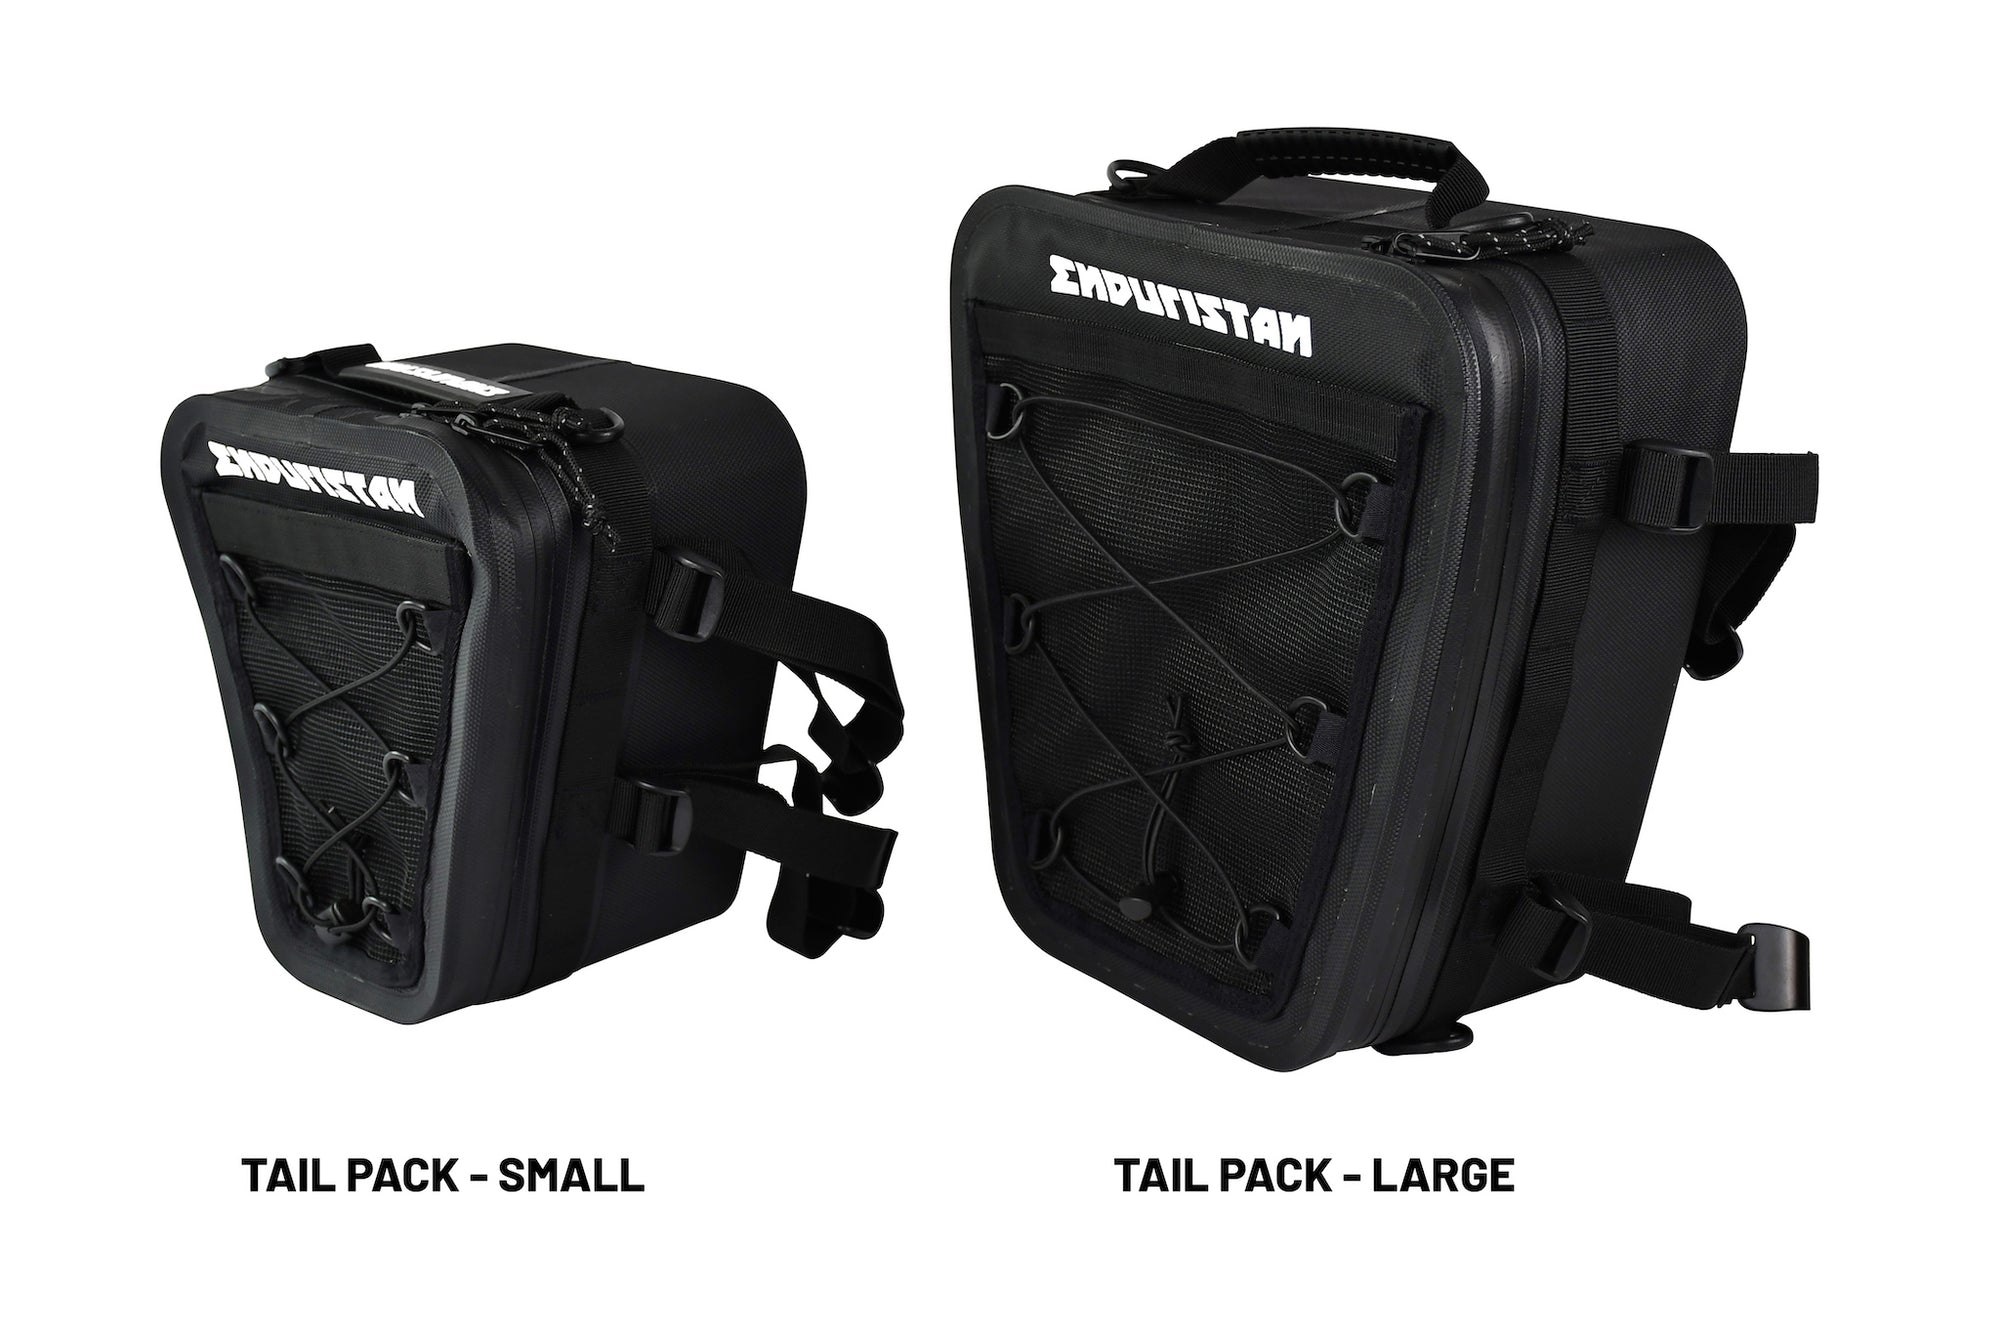 Tail Pack - Large